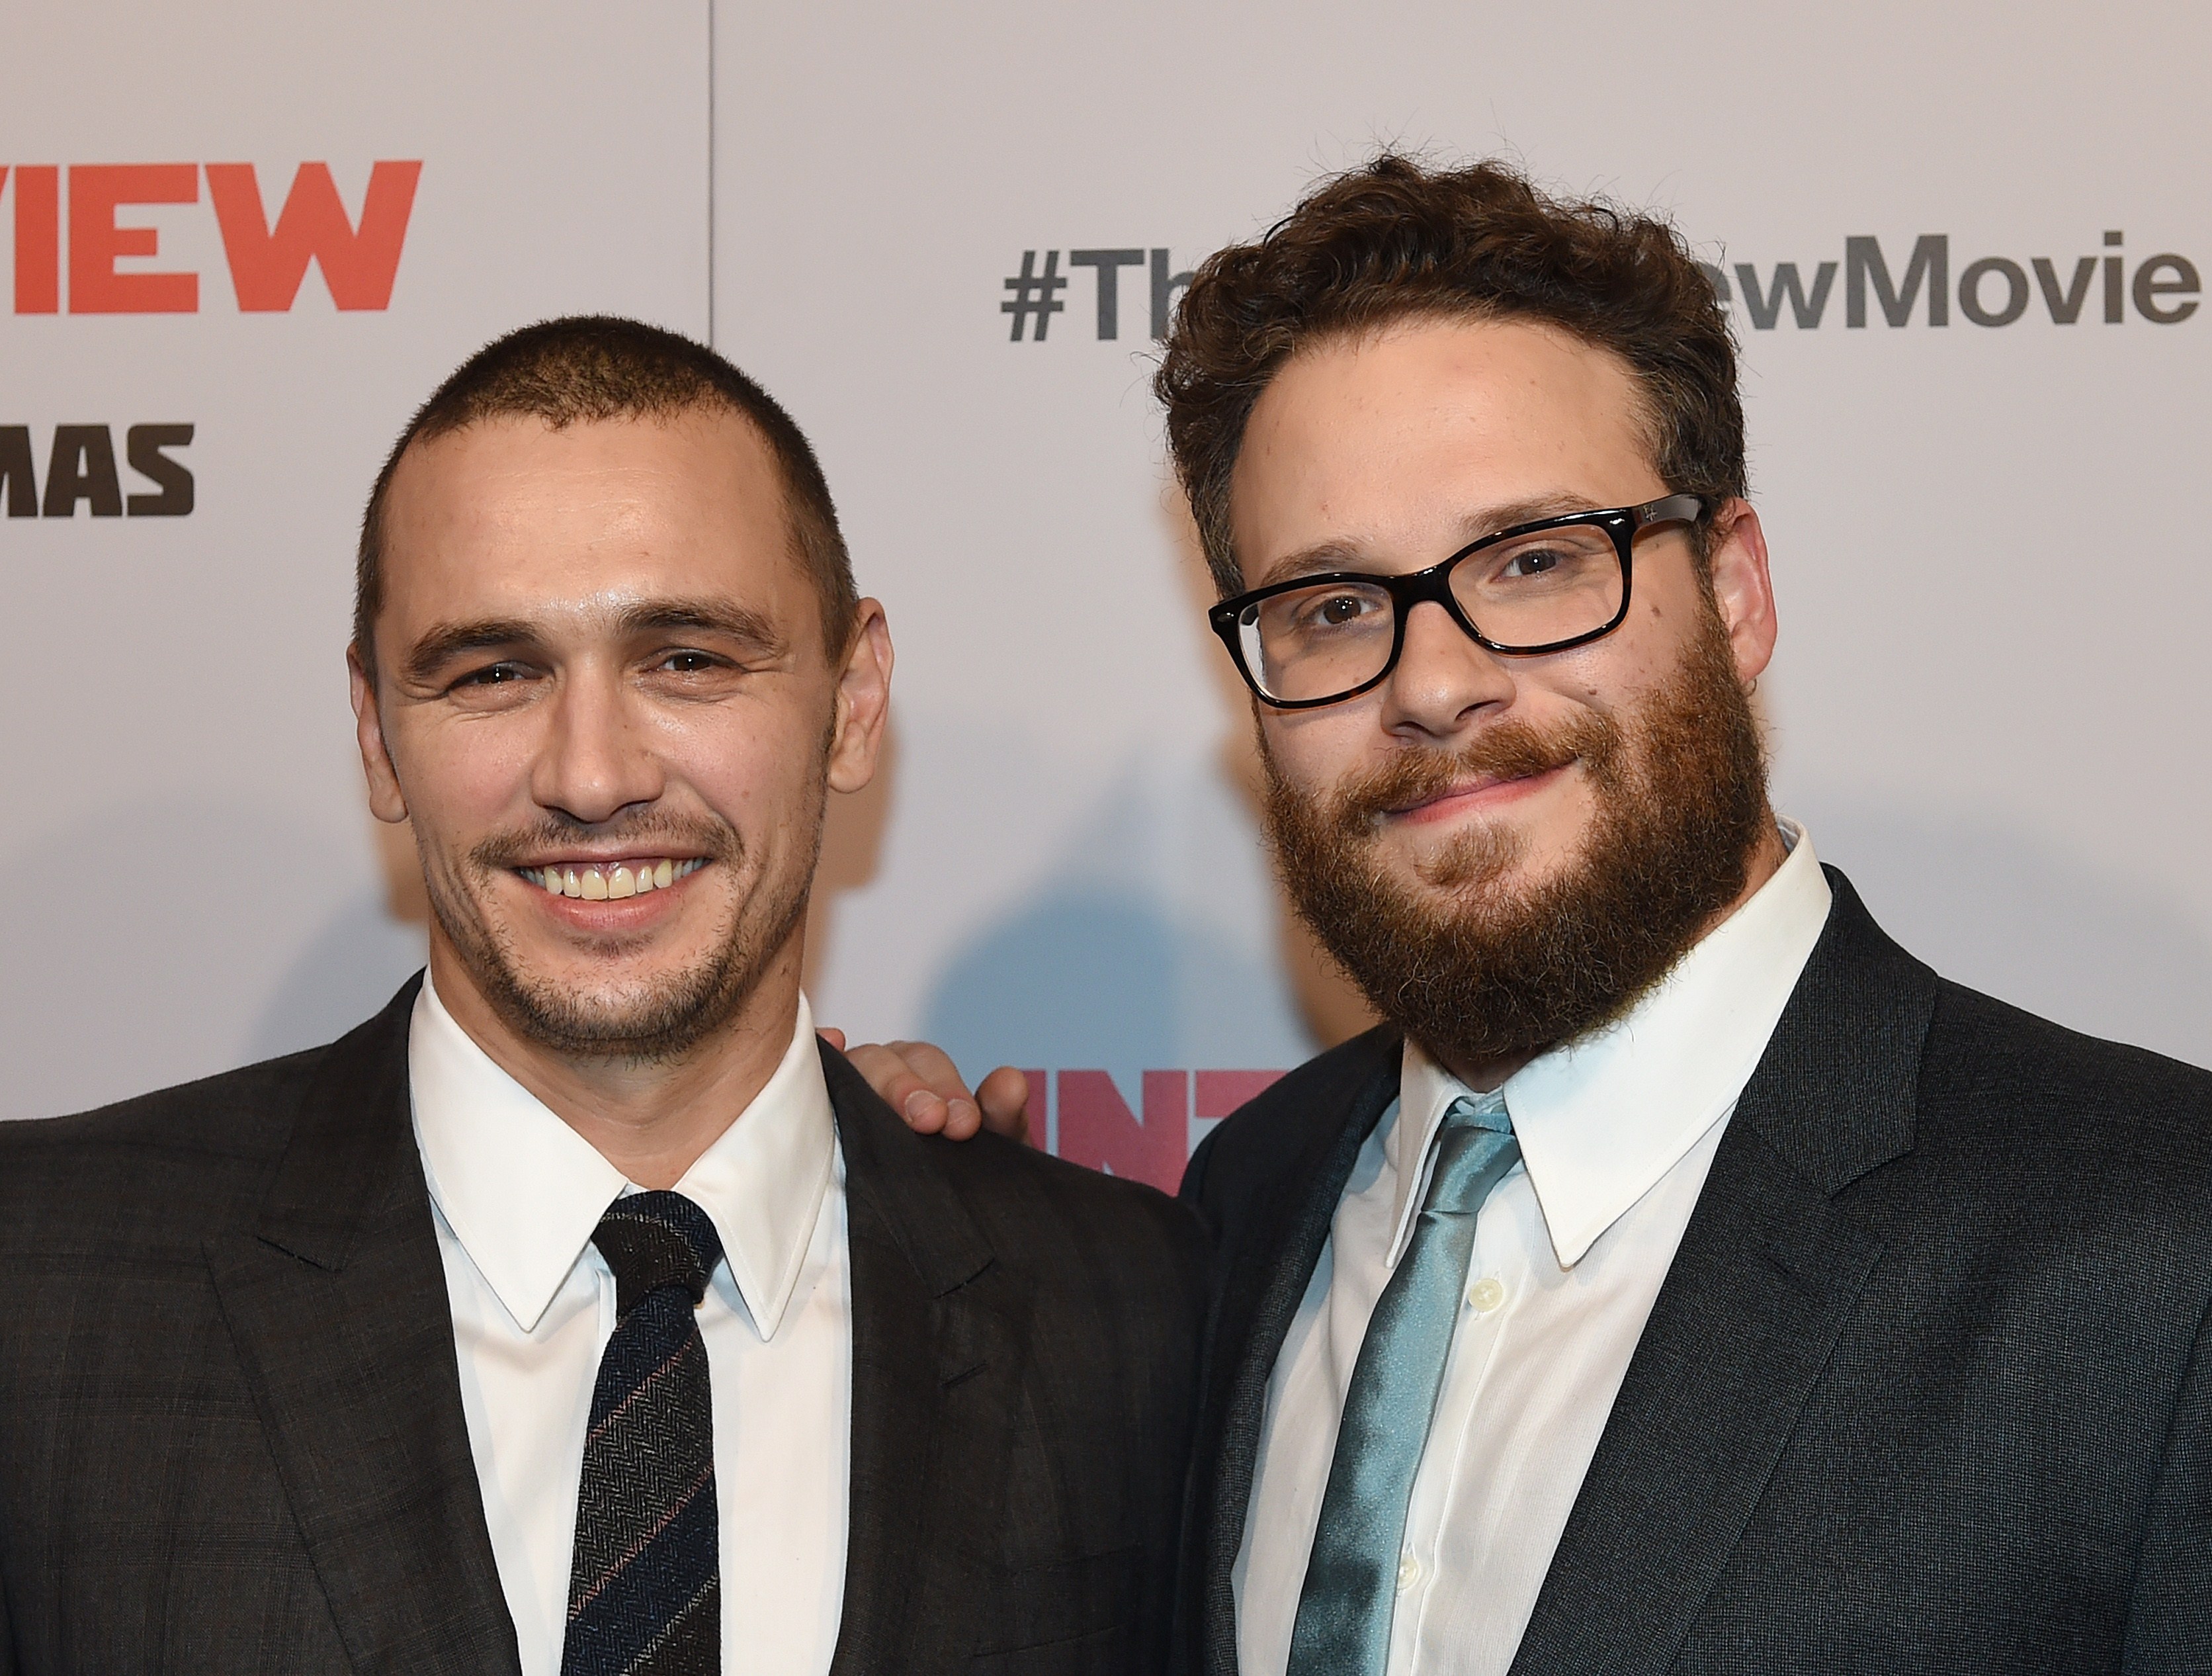 Actors James Franco (L) and Seth Rogen at the premiere of the film "The Interview" in Los Angeles, Ca. on Dec. 11, 2014. (AFP/Getty Images)